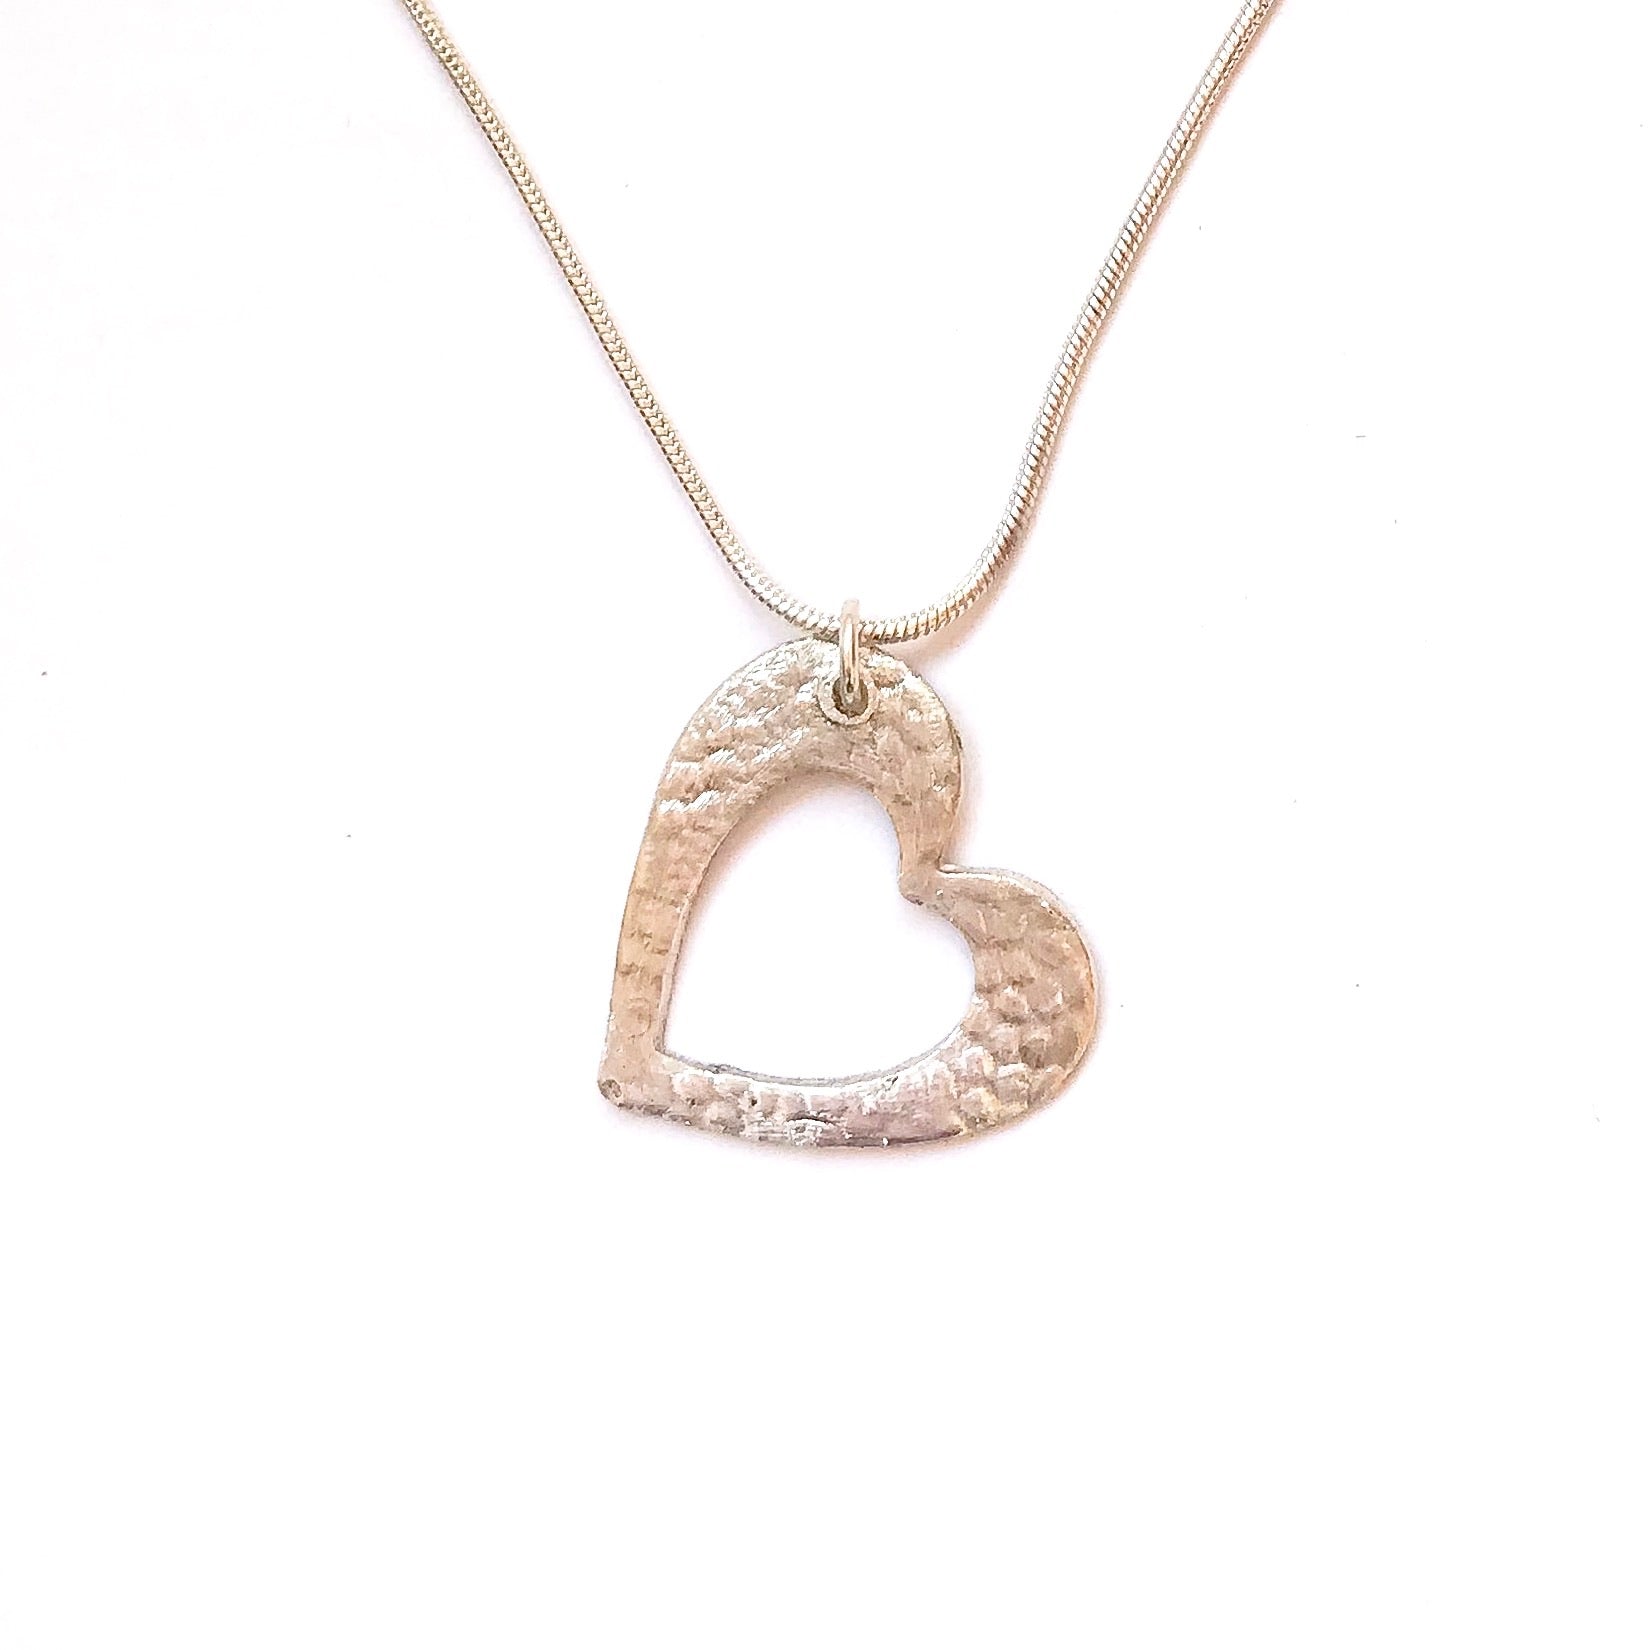 Signiture  of love heart necklace - Love Beach Beads